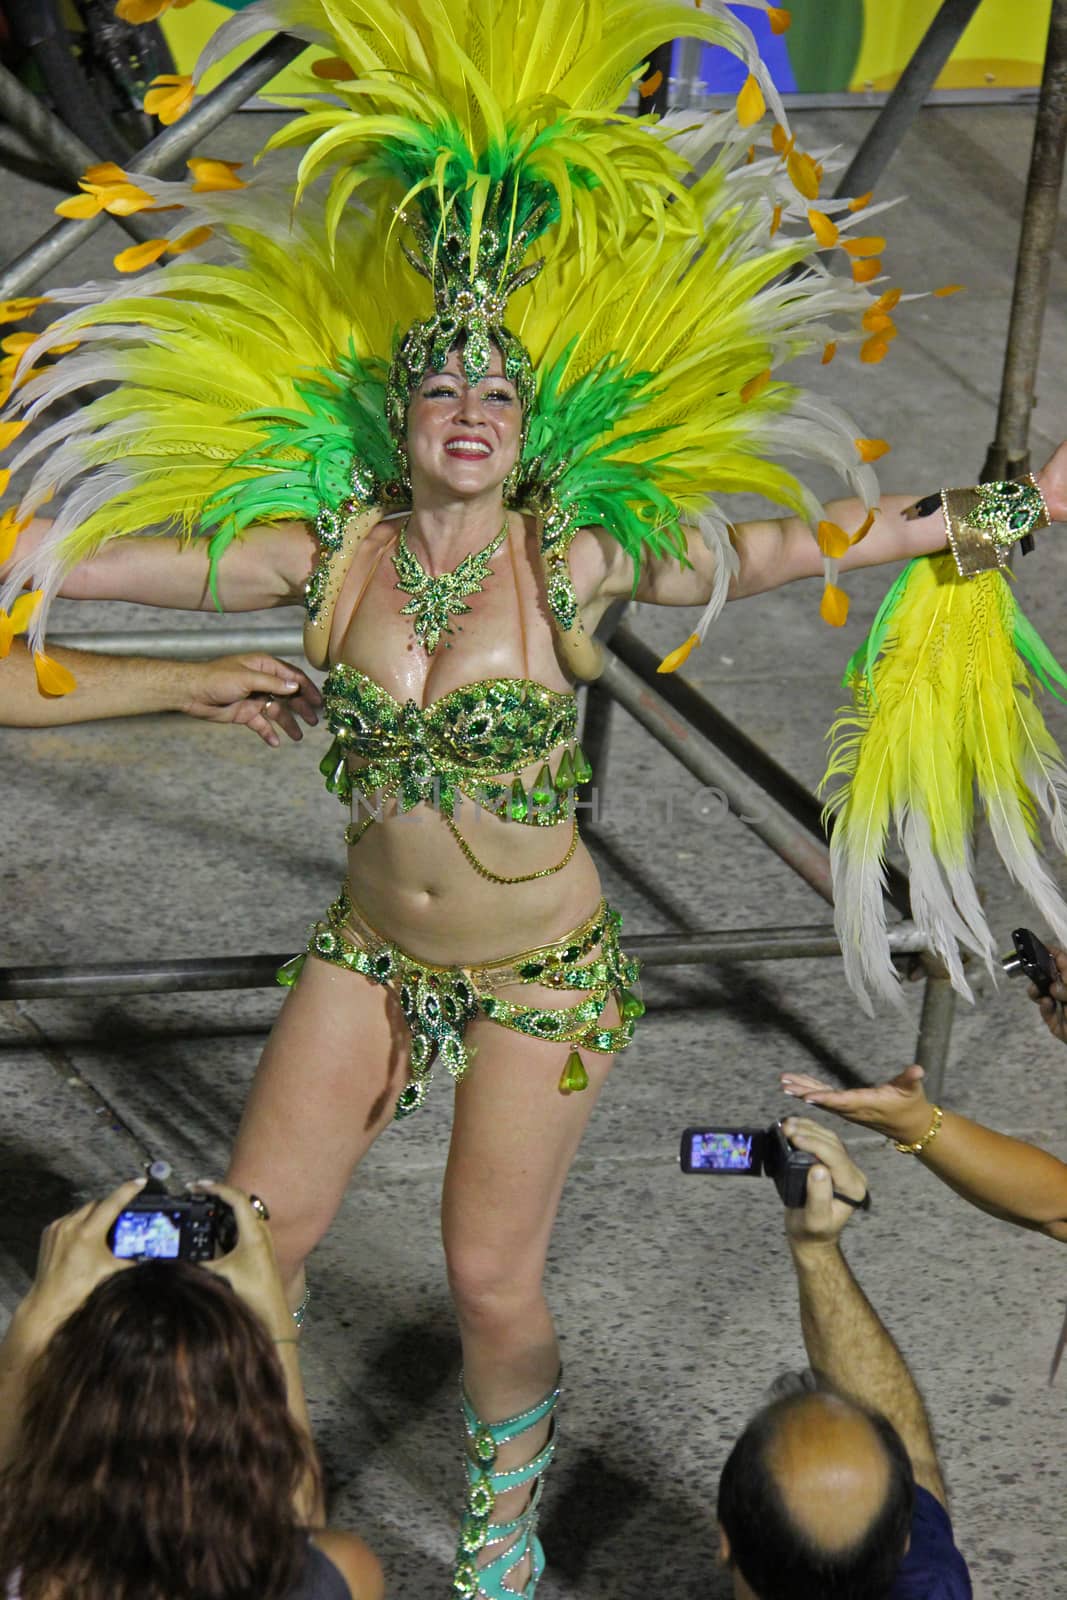 An entertainer performing at a carnaval in Rio de Janeiro, Brazil 03 Mar 2014 No model release Editorial only